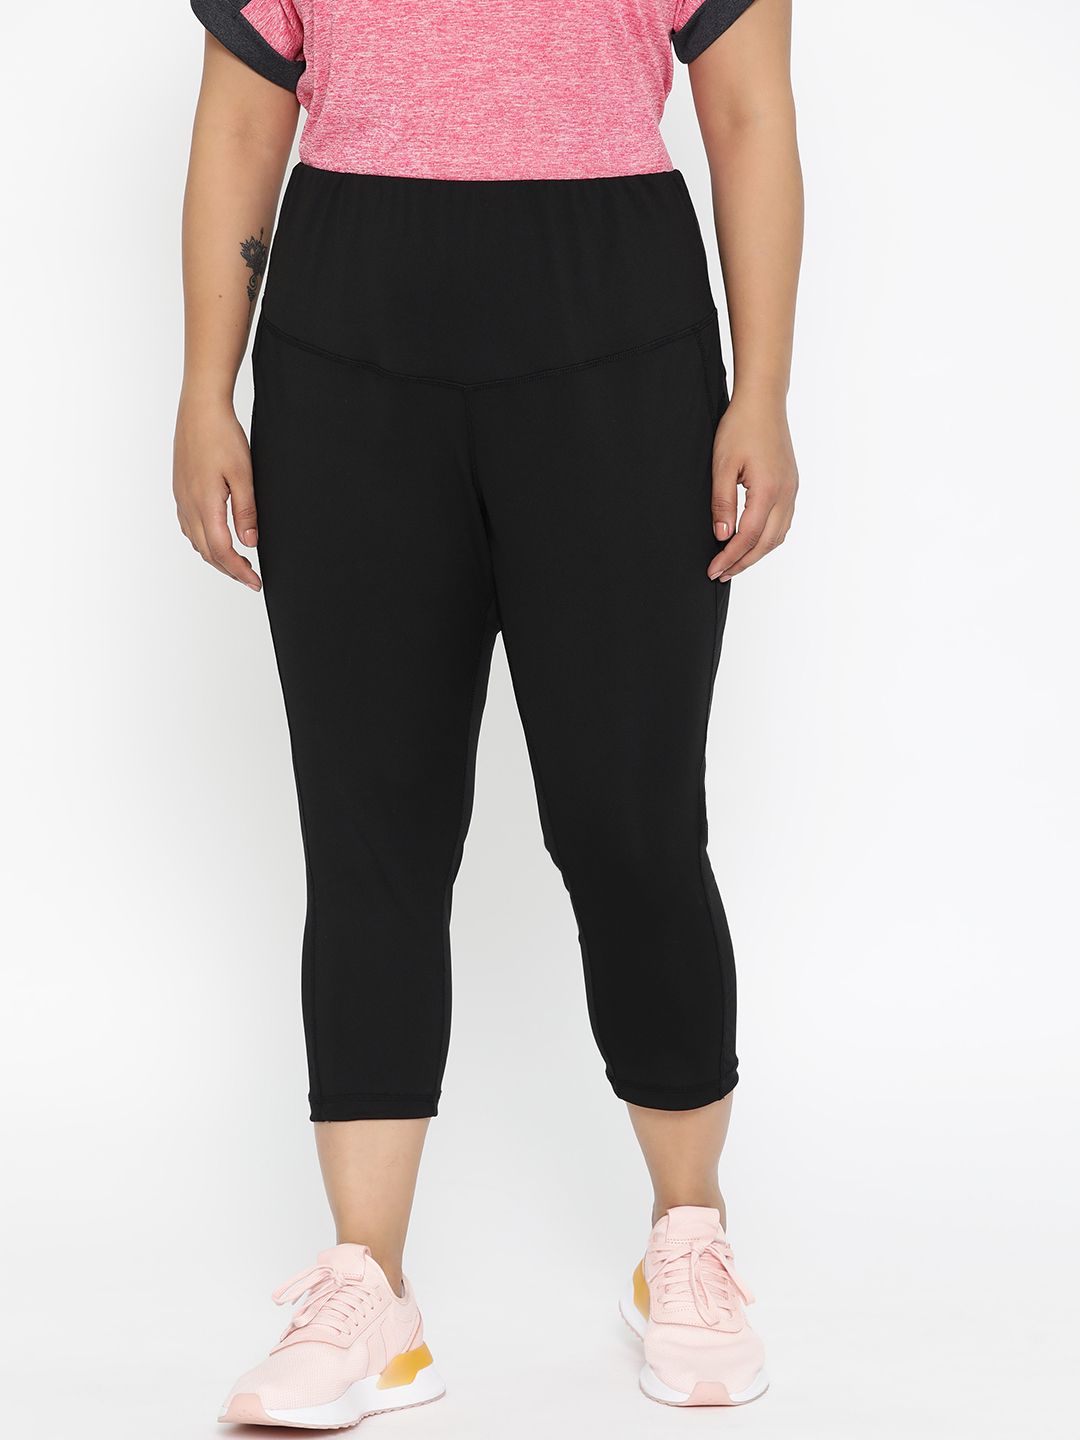 The Pink Moon Plus Size Women Black Solid Three-Fourth Gym Tights Price in India